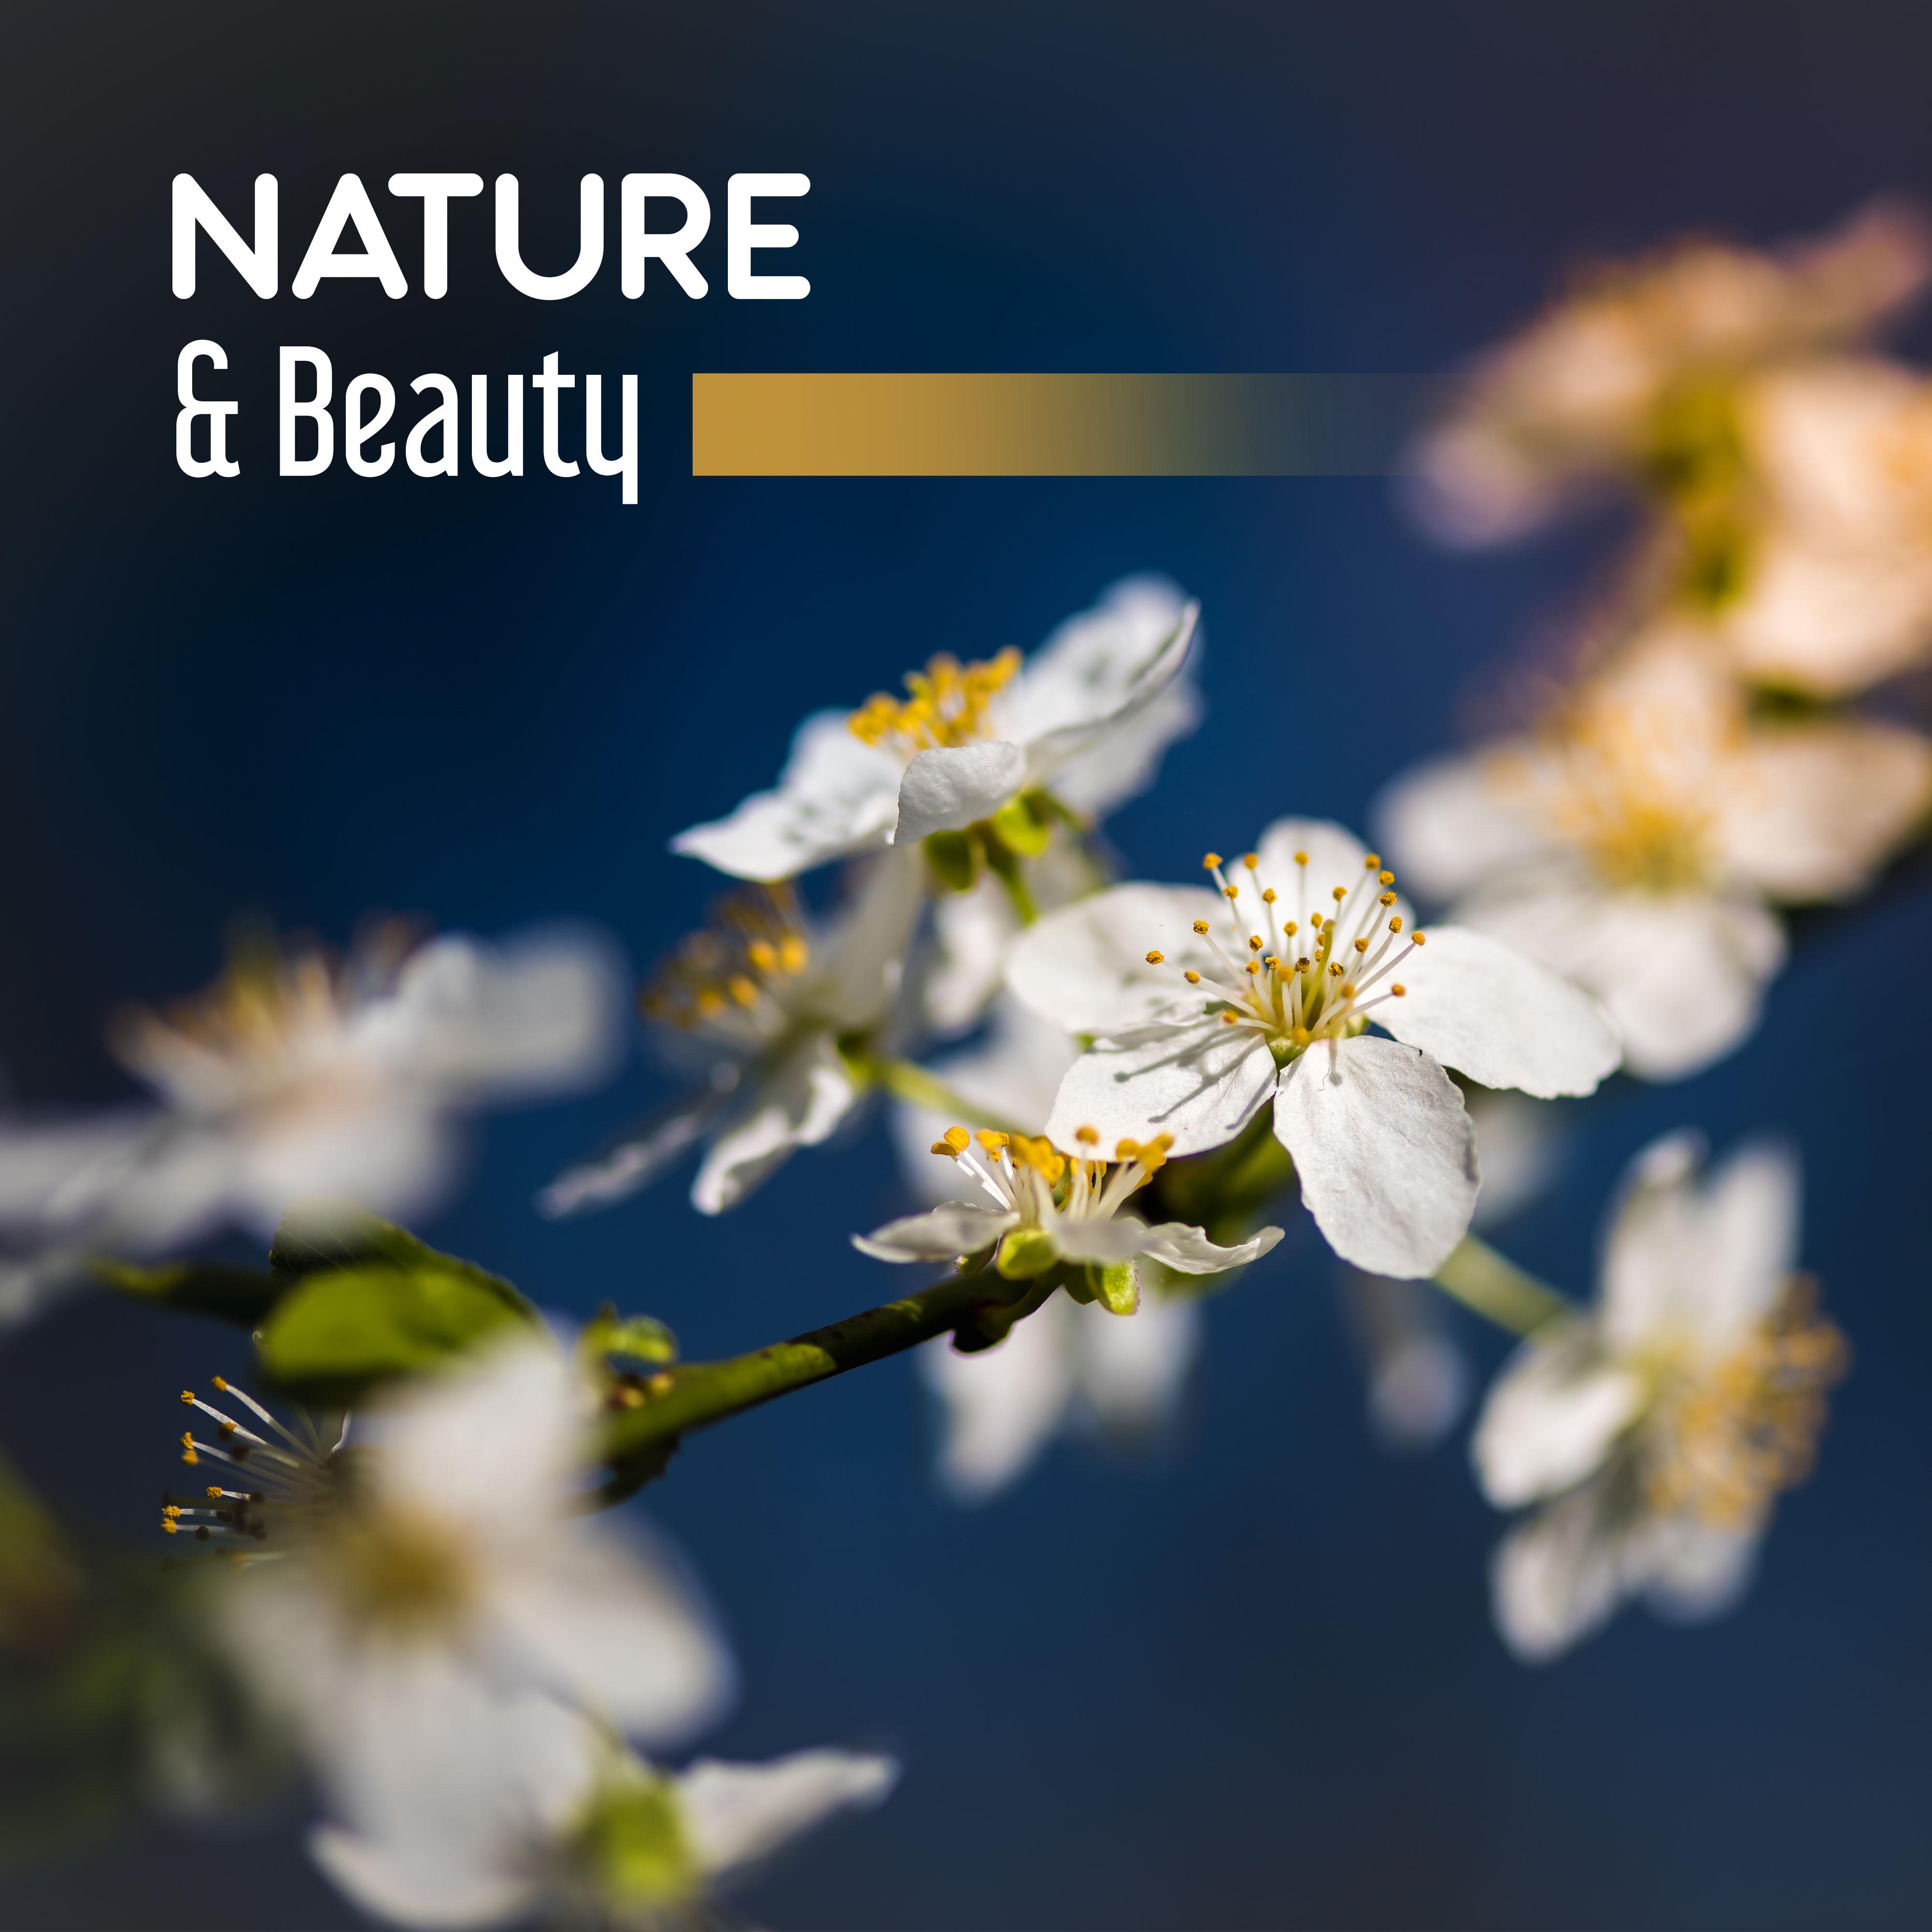 Nature  Beauty  Gentle Nature Sounds for Relaxation, Calm Down, Contemplation of Nature, Pure Mind, Singing Birds, Soothing Rain